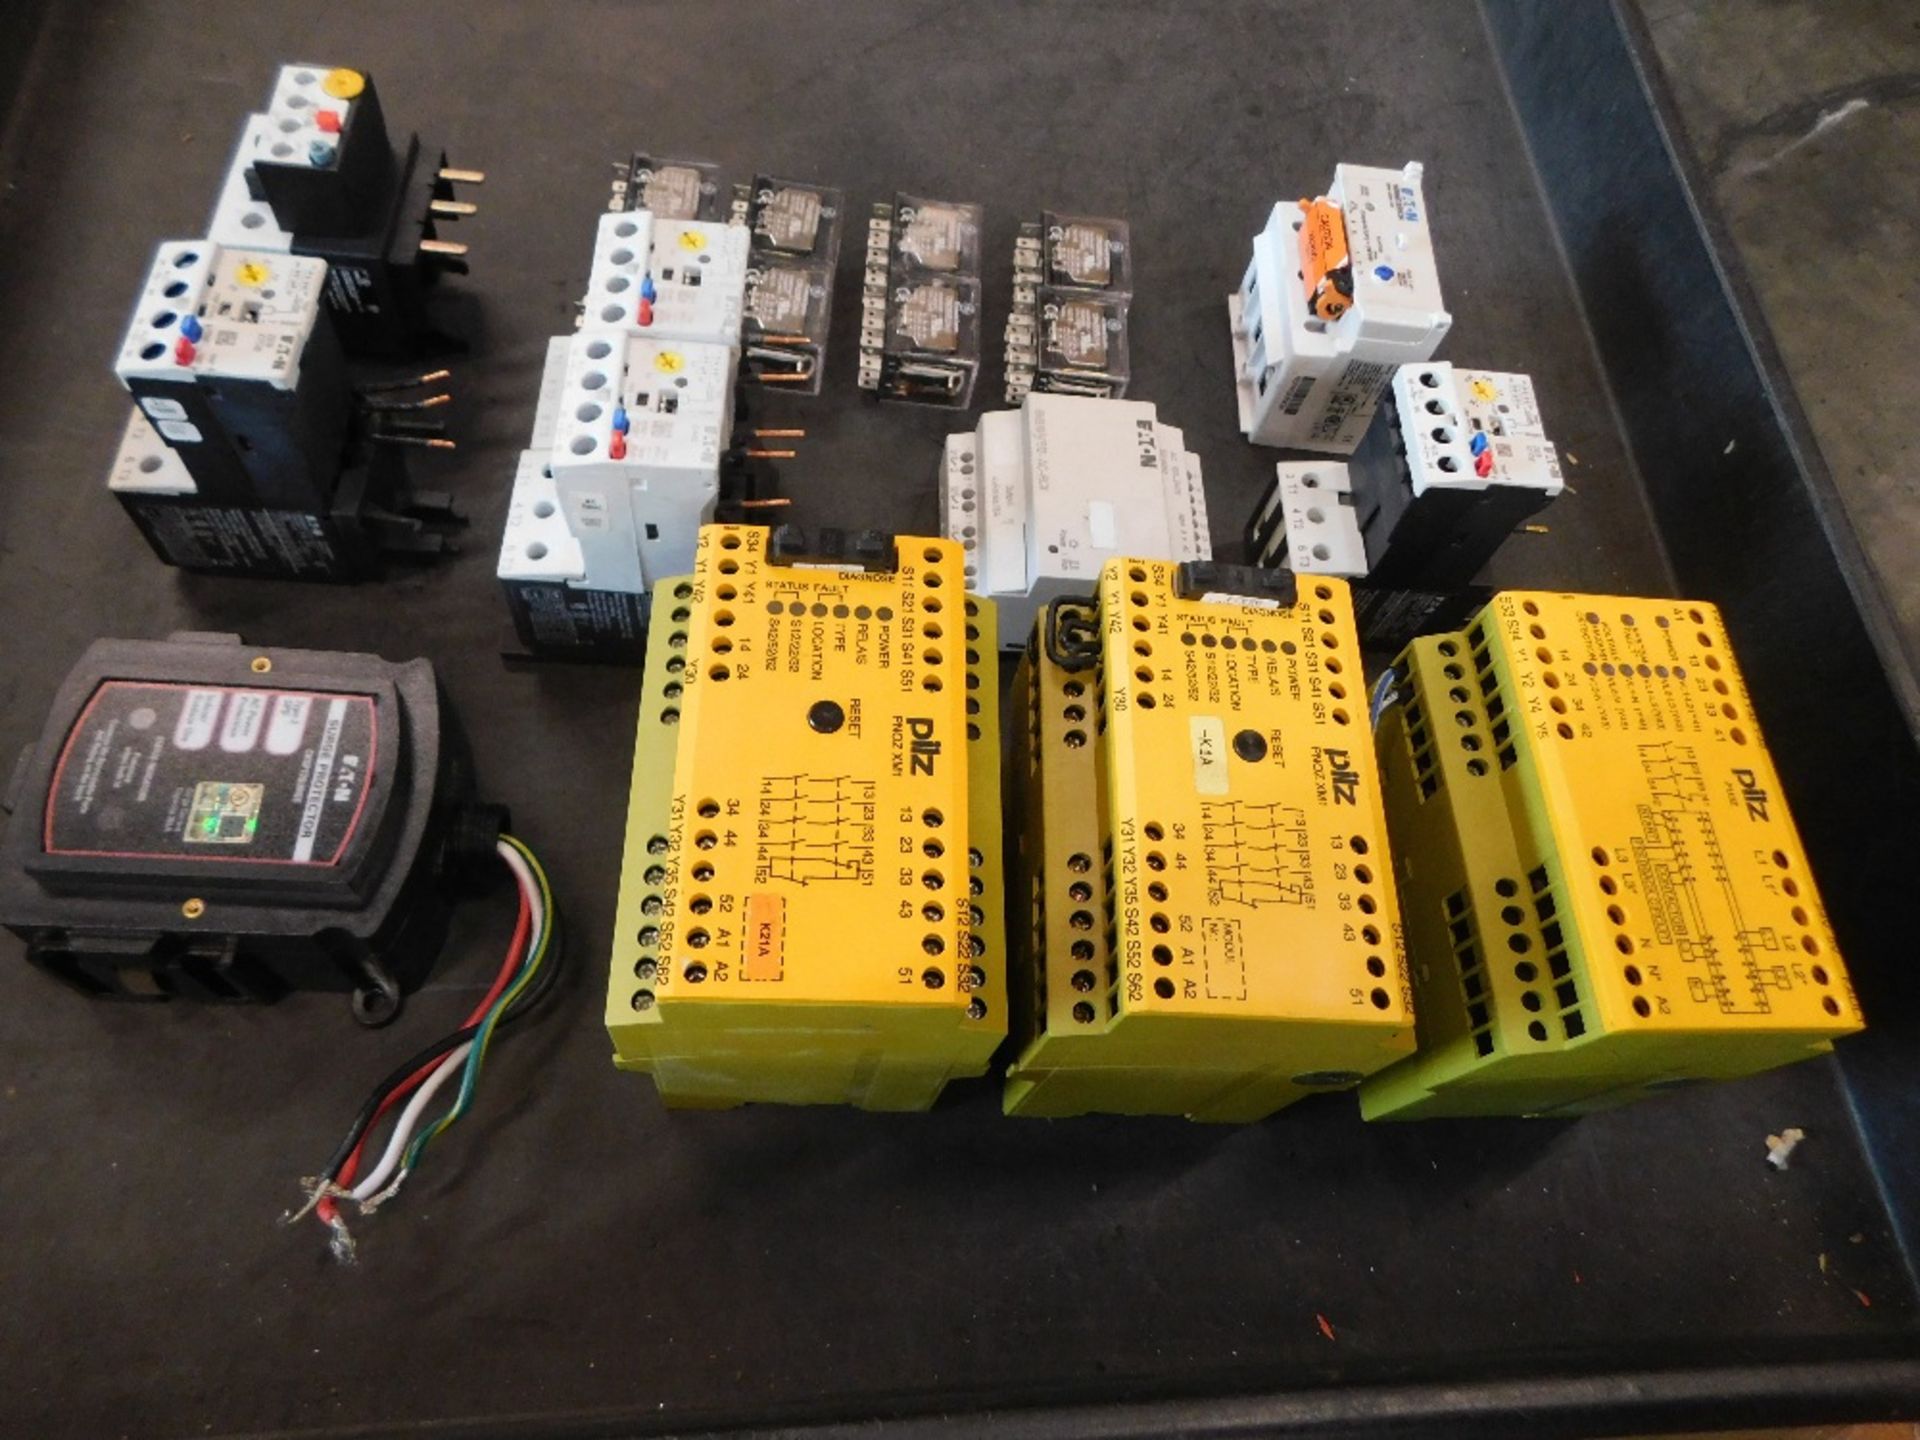 19x Eaton and Pilz Relays - Assorted Models - Image 3 of 8